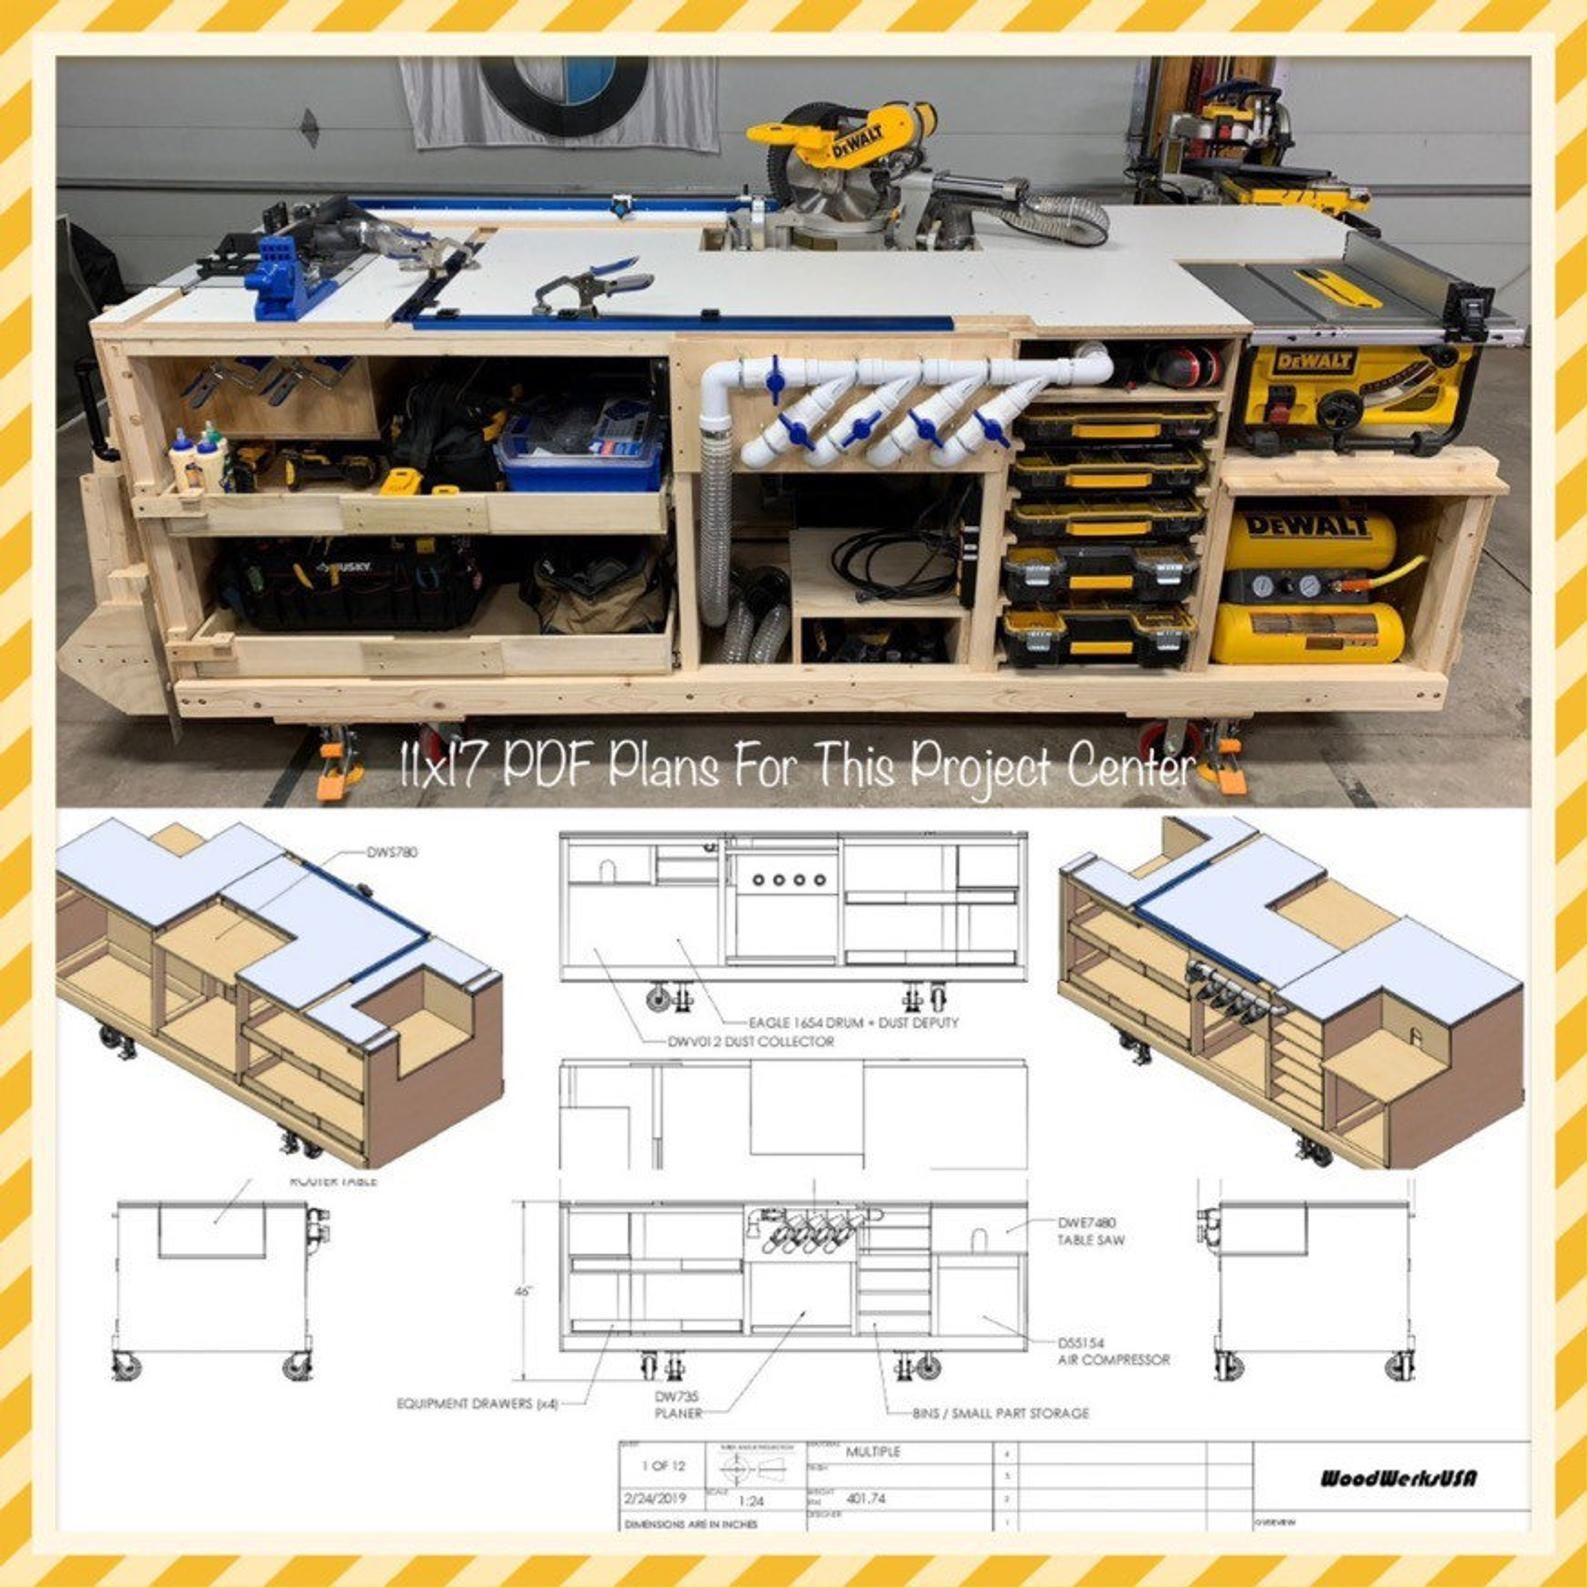 PDF Mobile Project Center Workbench Plans | DeWalt | Kreg | Miter Saw Stand | Table Saw Outfeed | Router Table | Planer Stand | Dust Collect - PDF Mobile Project Center Workbench Plans | DeWalt | Kreg | Miter Saw Stand | Table Saw Outfeed | Router Table | Planer Stand | Dust Collect -   17 diy Table saw ideas